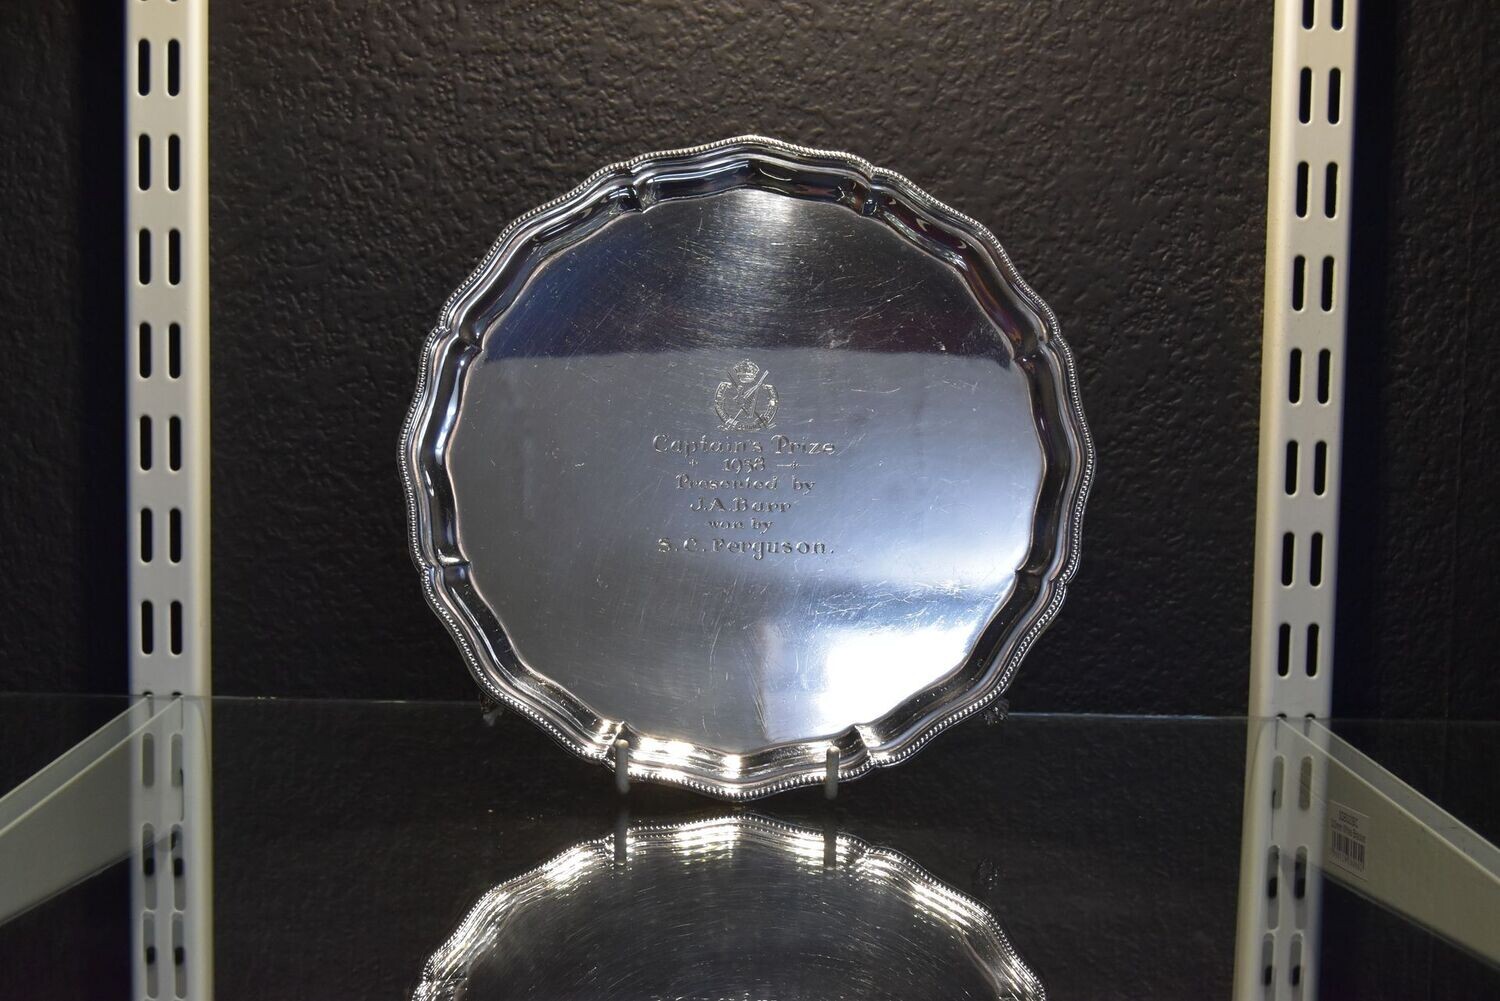 Silver Plate "Engraved" c1957